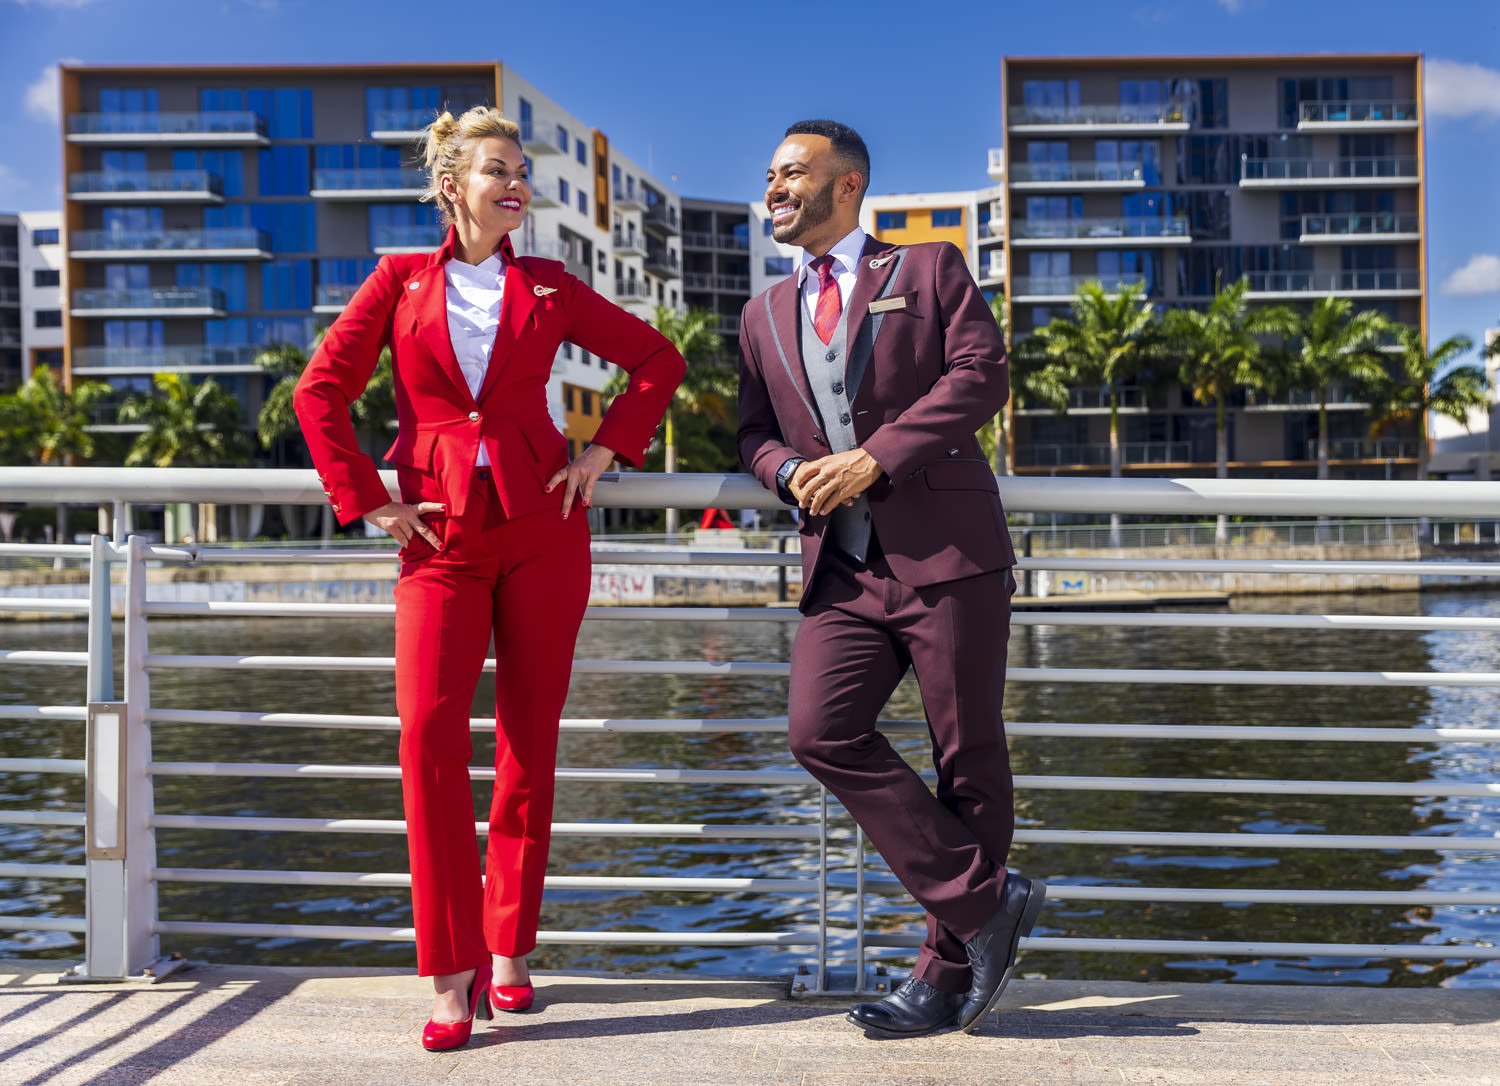 Two Virgin Atlantic cabin crew members hanging out by the water in Tampa